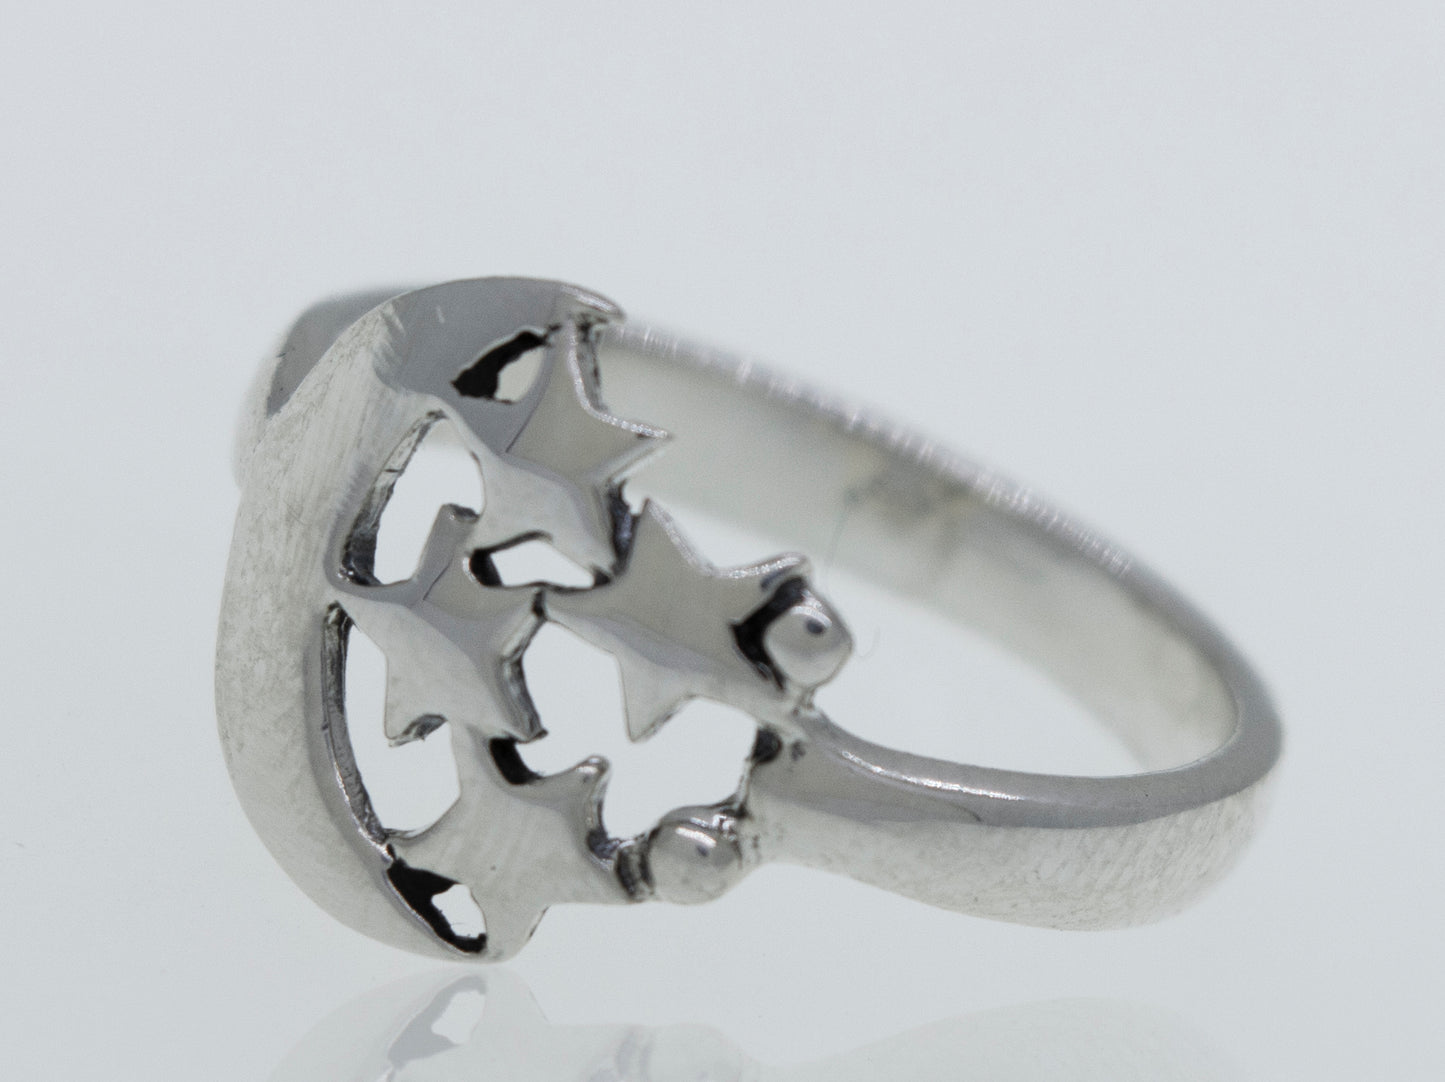 A Super Silver Crescent Moon Ring with Four Stars adorned with stars and a crescent moon.